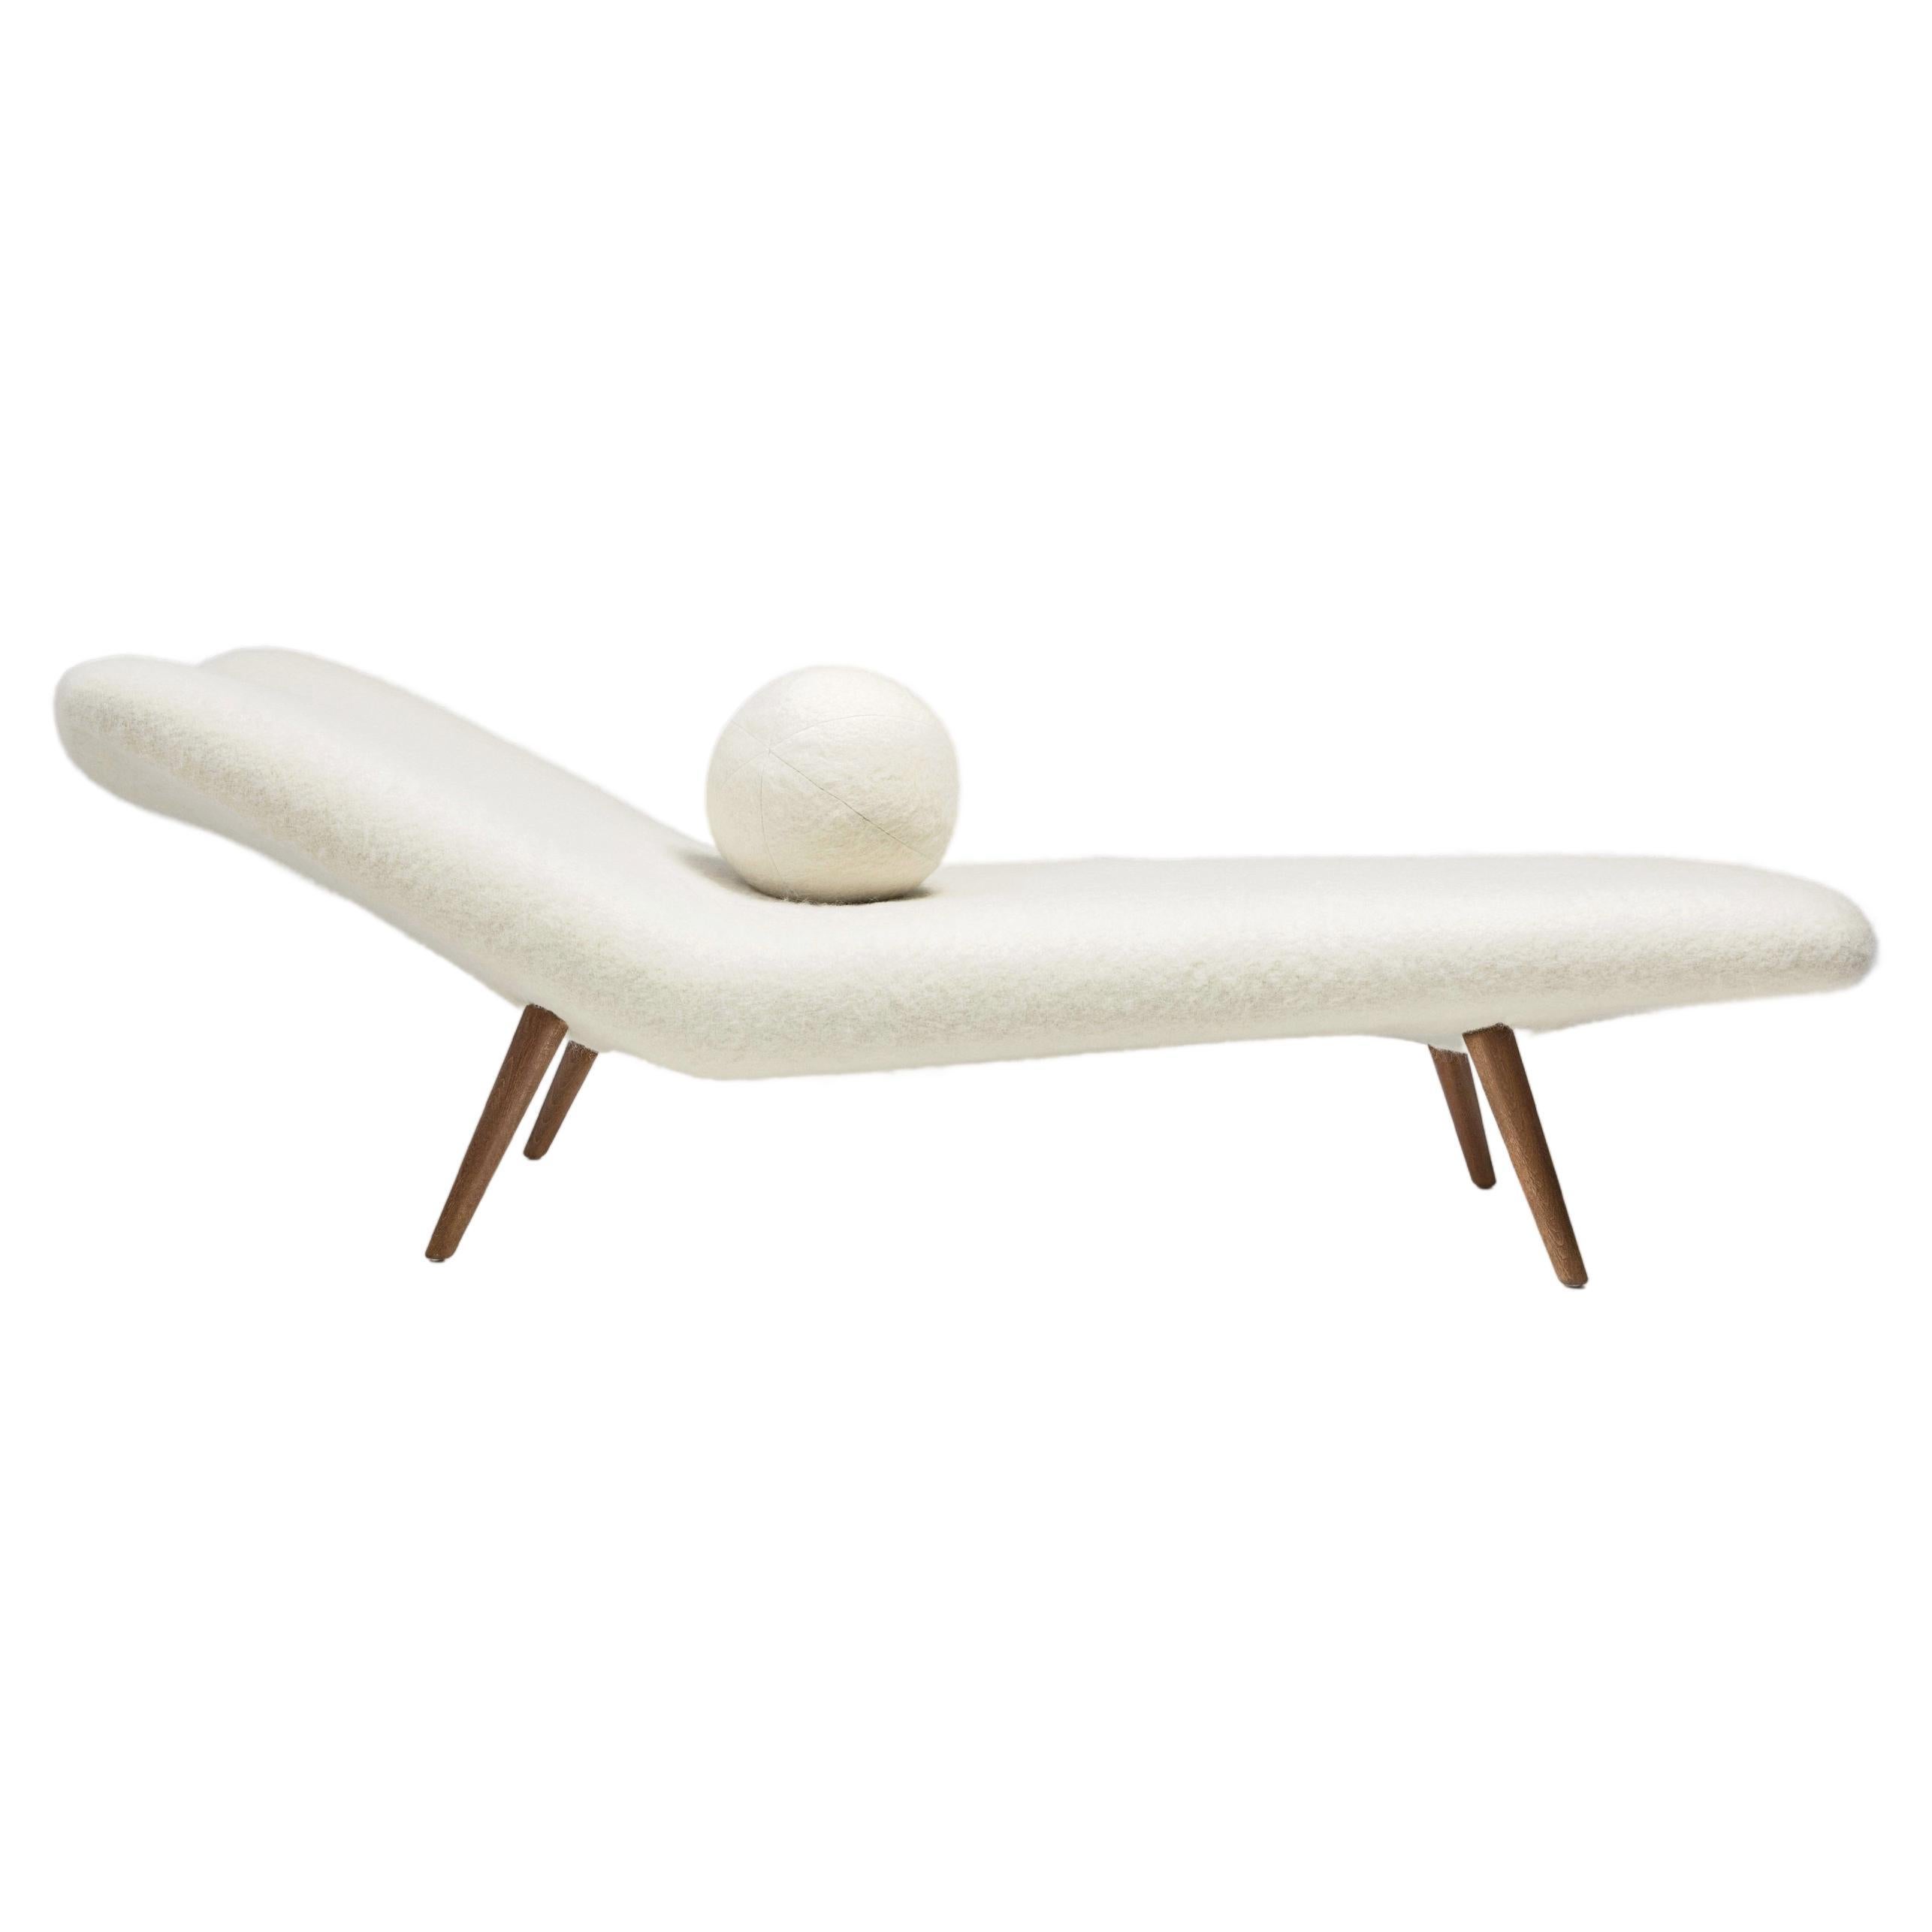 Méridienne Theo Ruth Daybed pour Artifort, Pays-Bas, années 1950